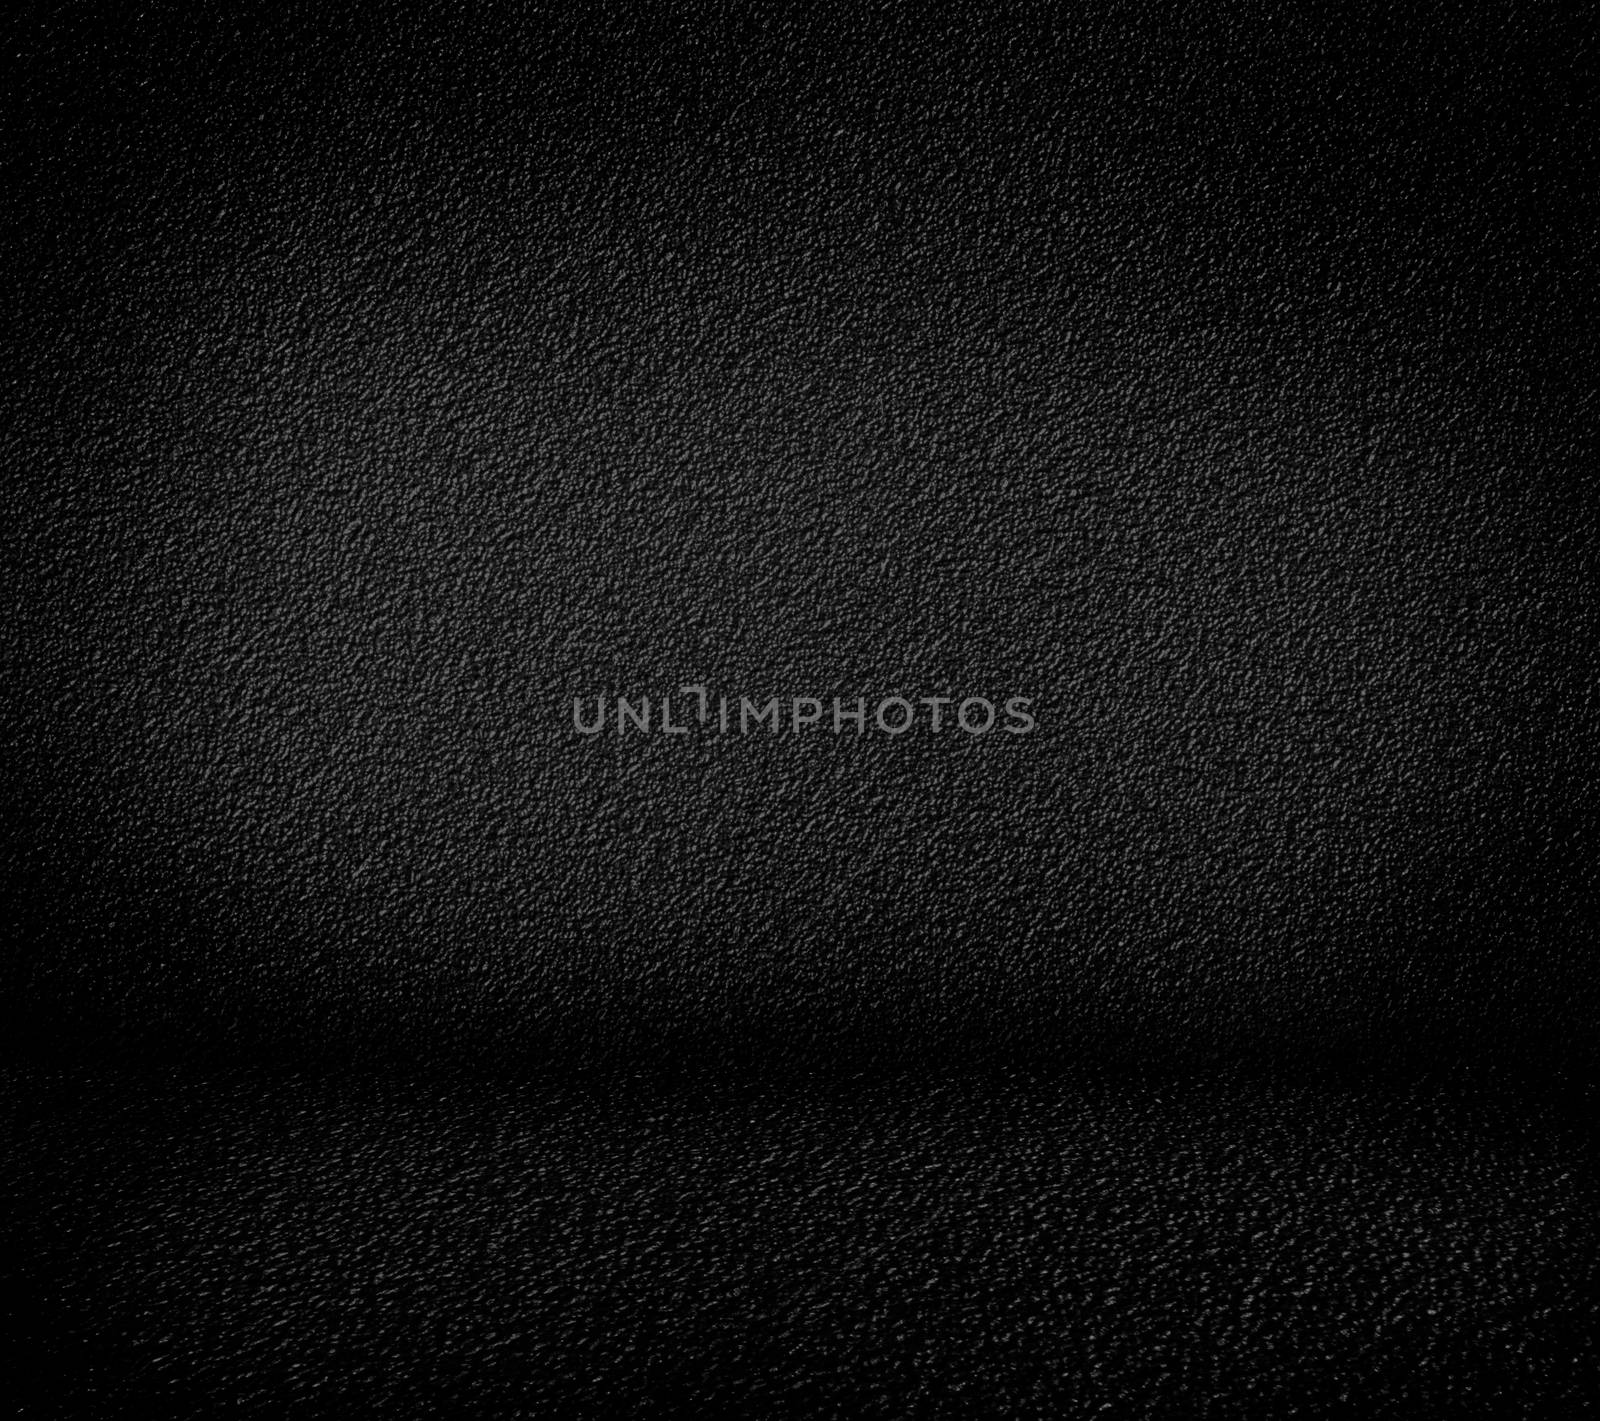 Black minimalist grainy wall background and black floor. High resolution, good for templates, backgrounds, textures.